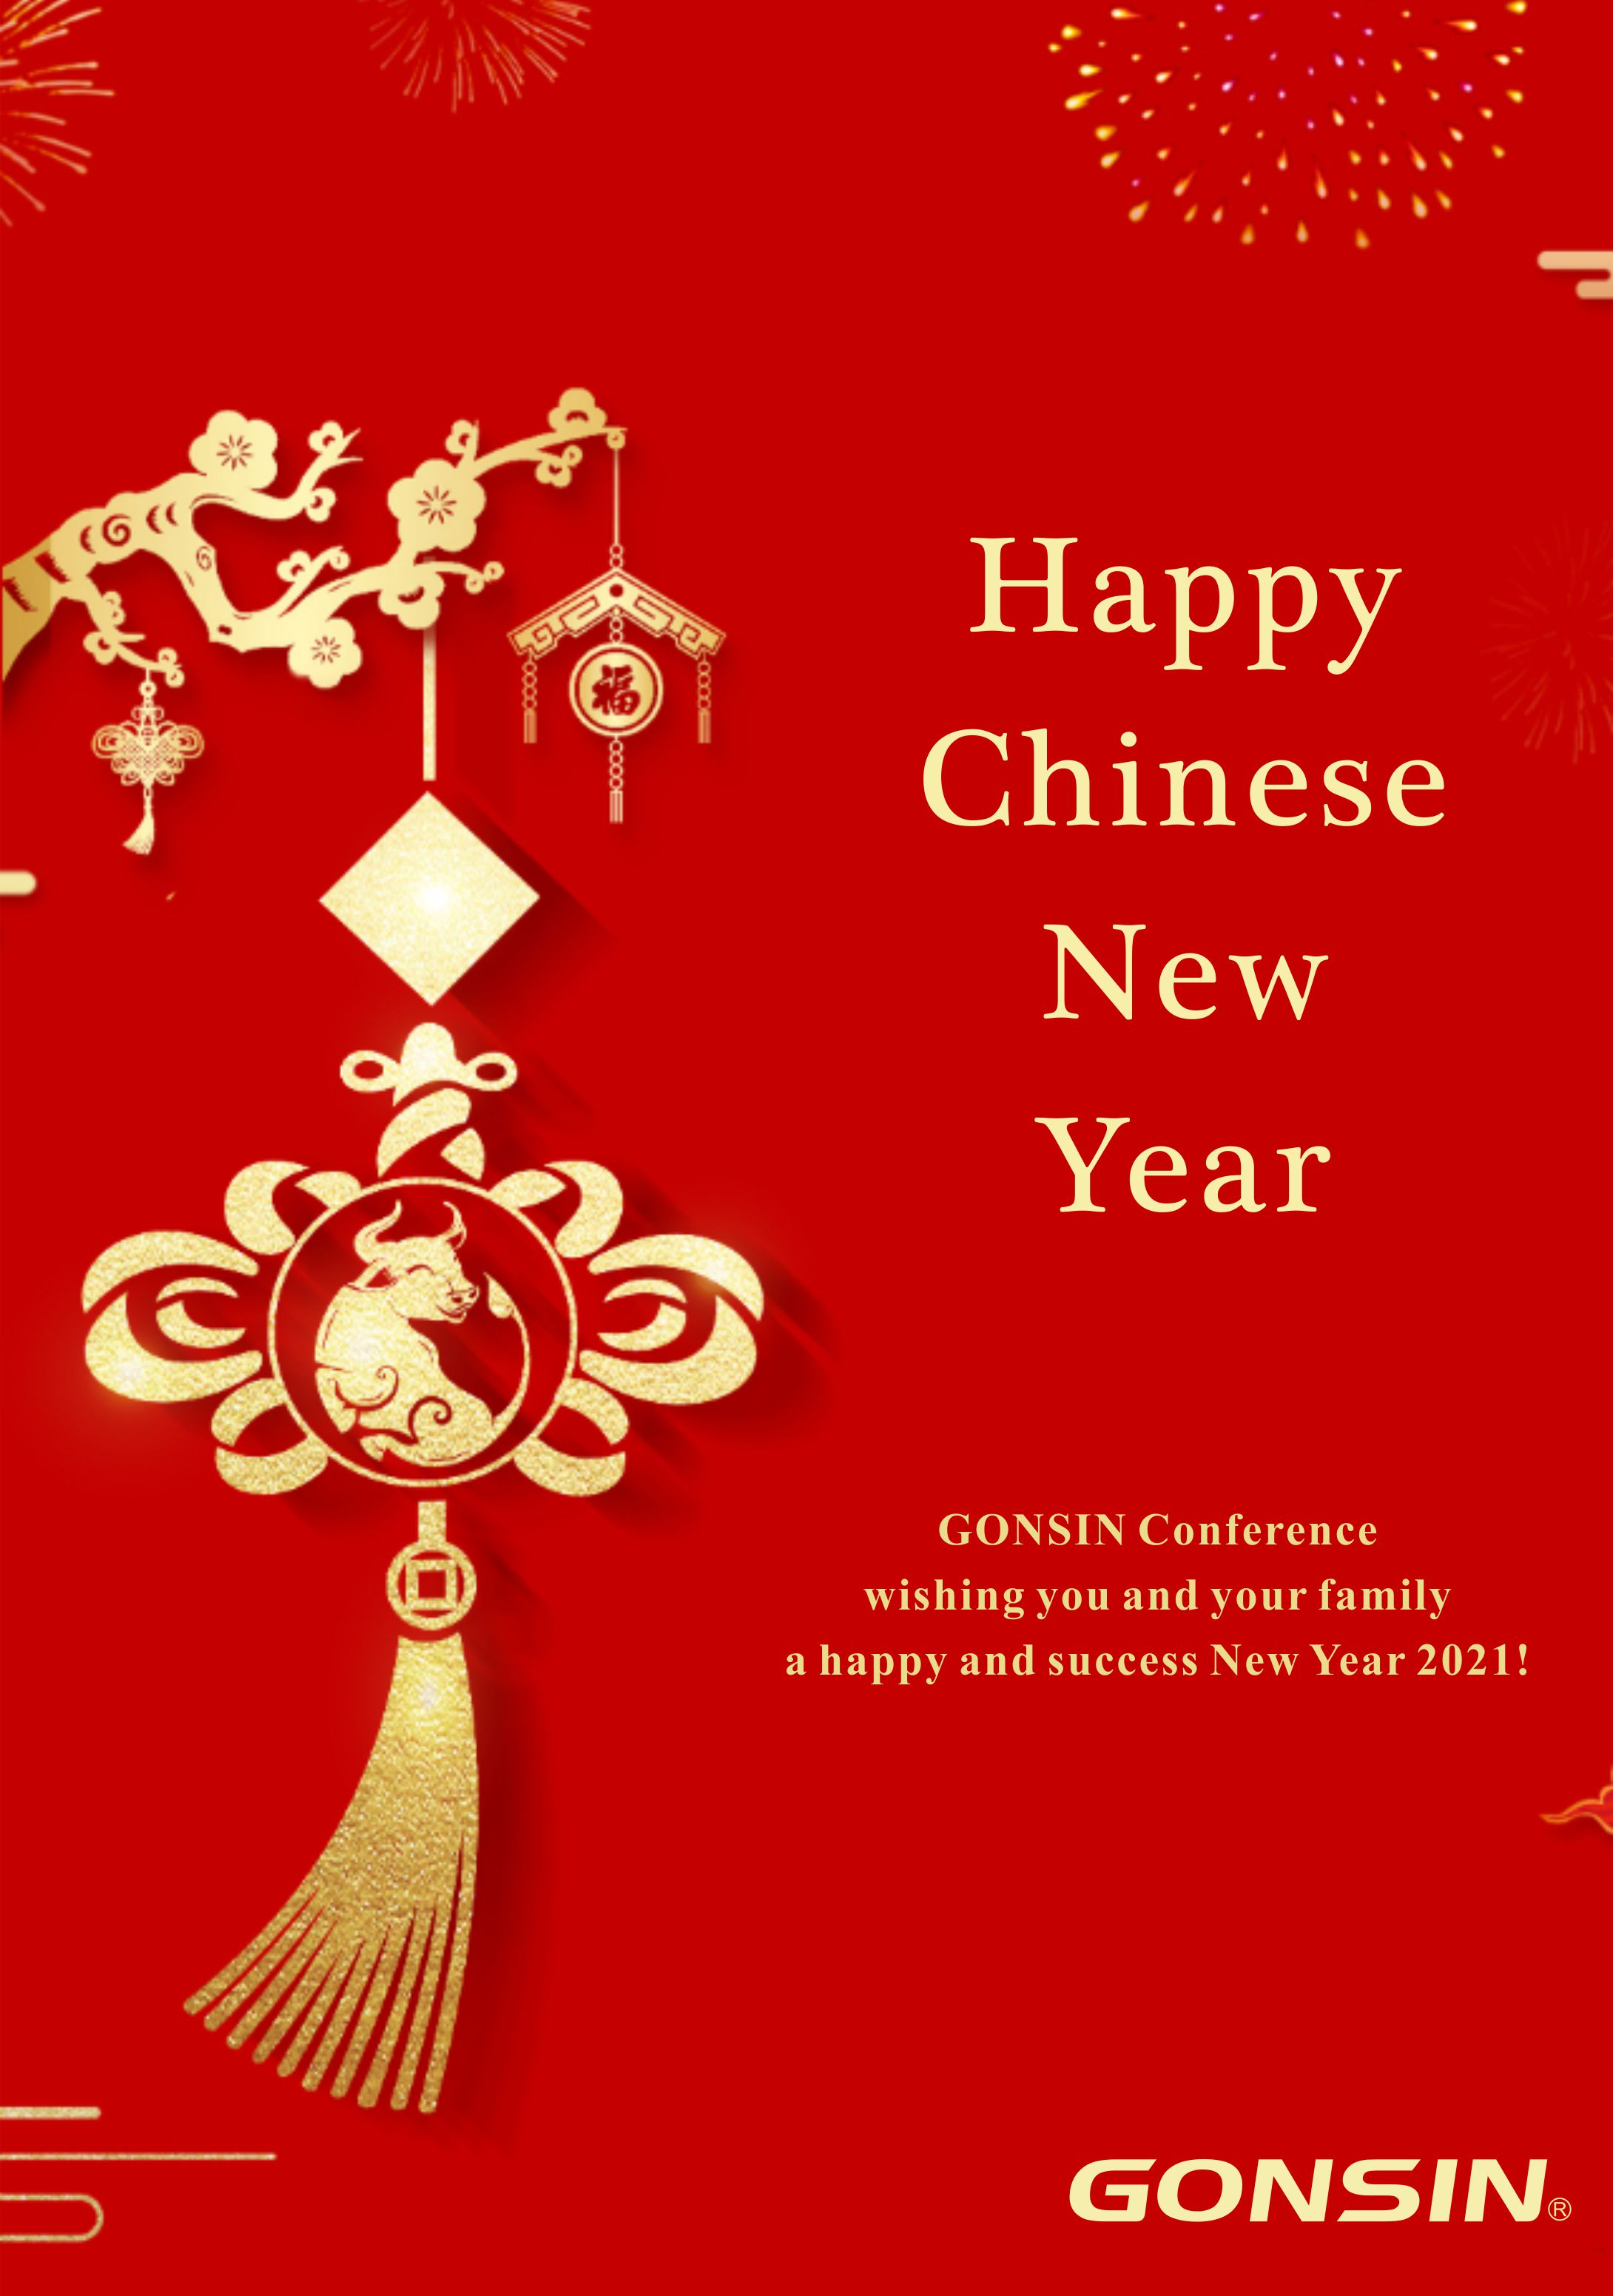 Gonsin Conference Wishing You Happy Chinese New Year 2021